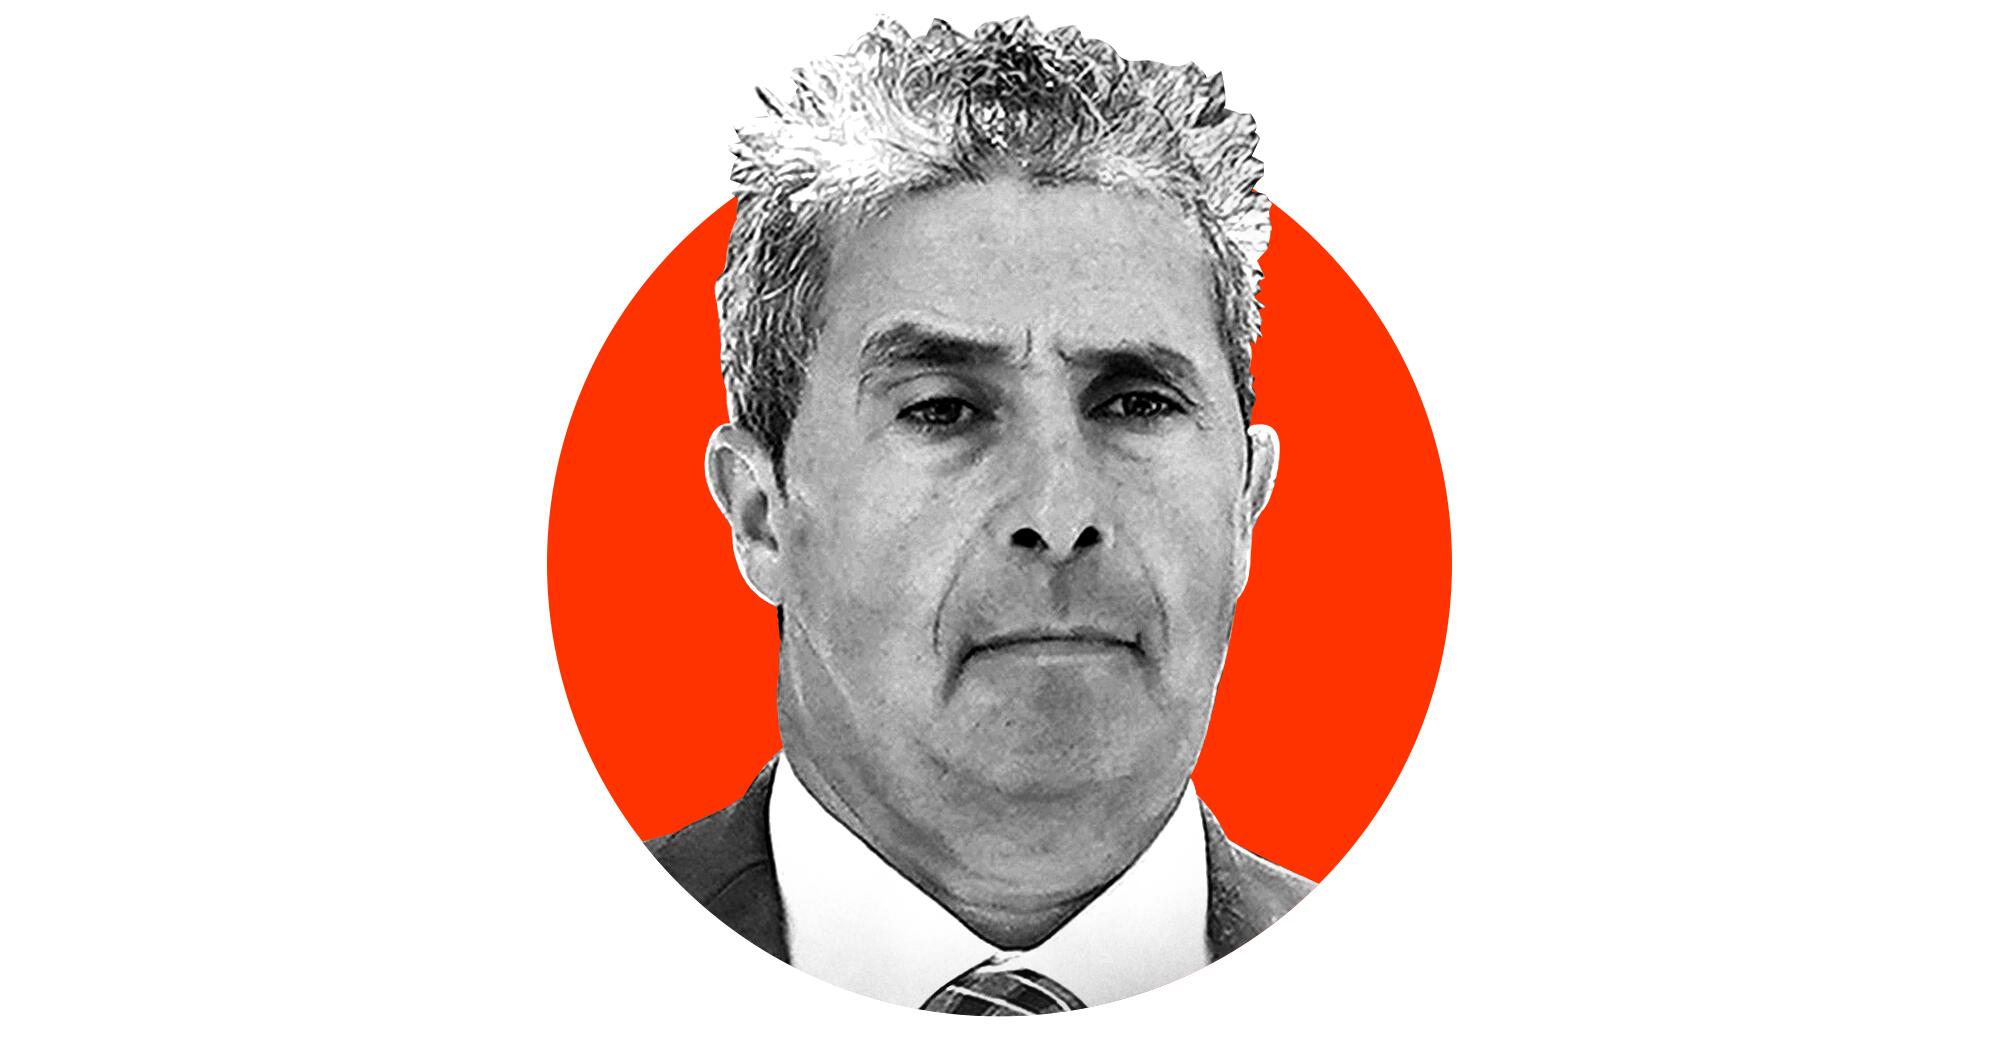 A photo illustration of Mar-a-Lago employee Carlos De Oliveira's black-and-white police mugshot emerging from a red circle